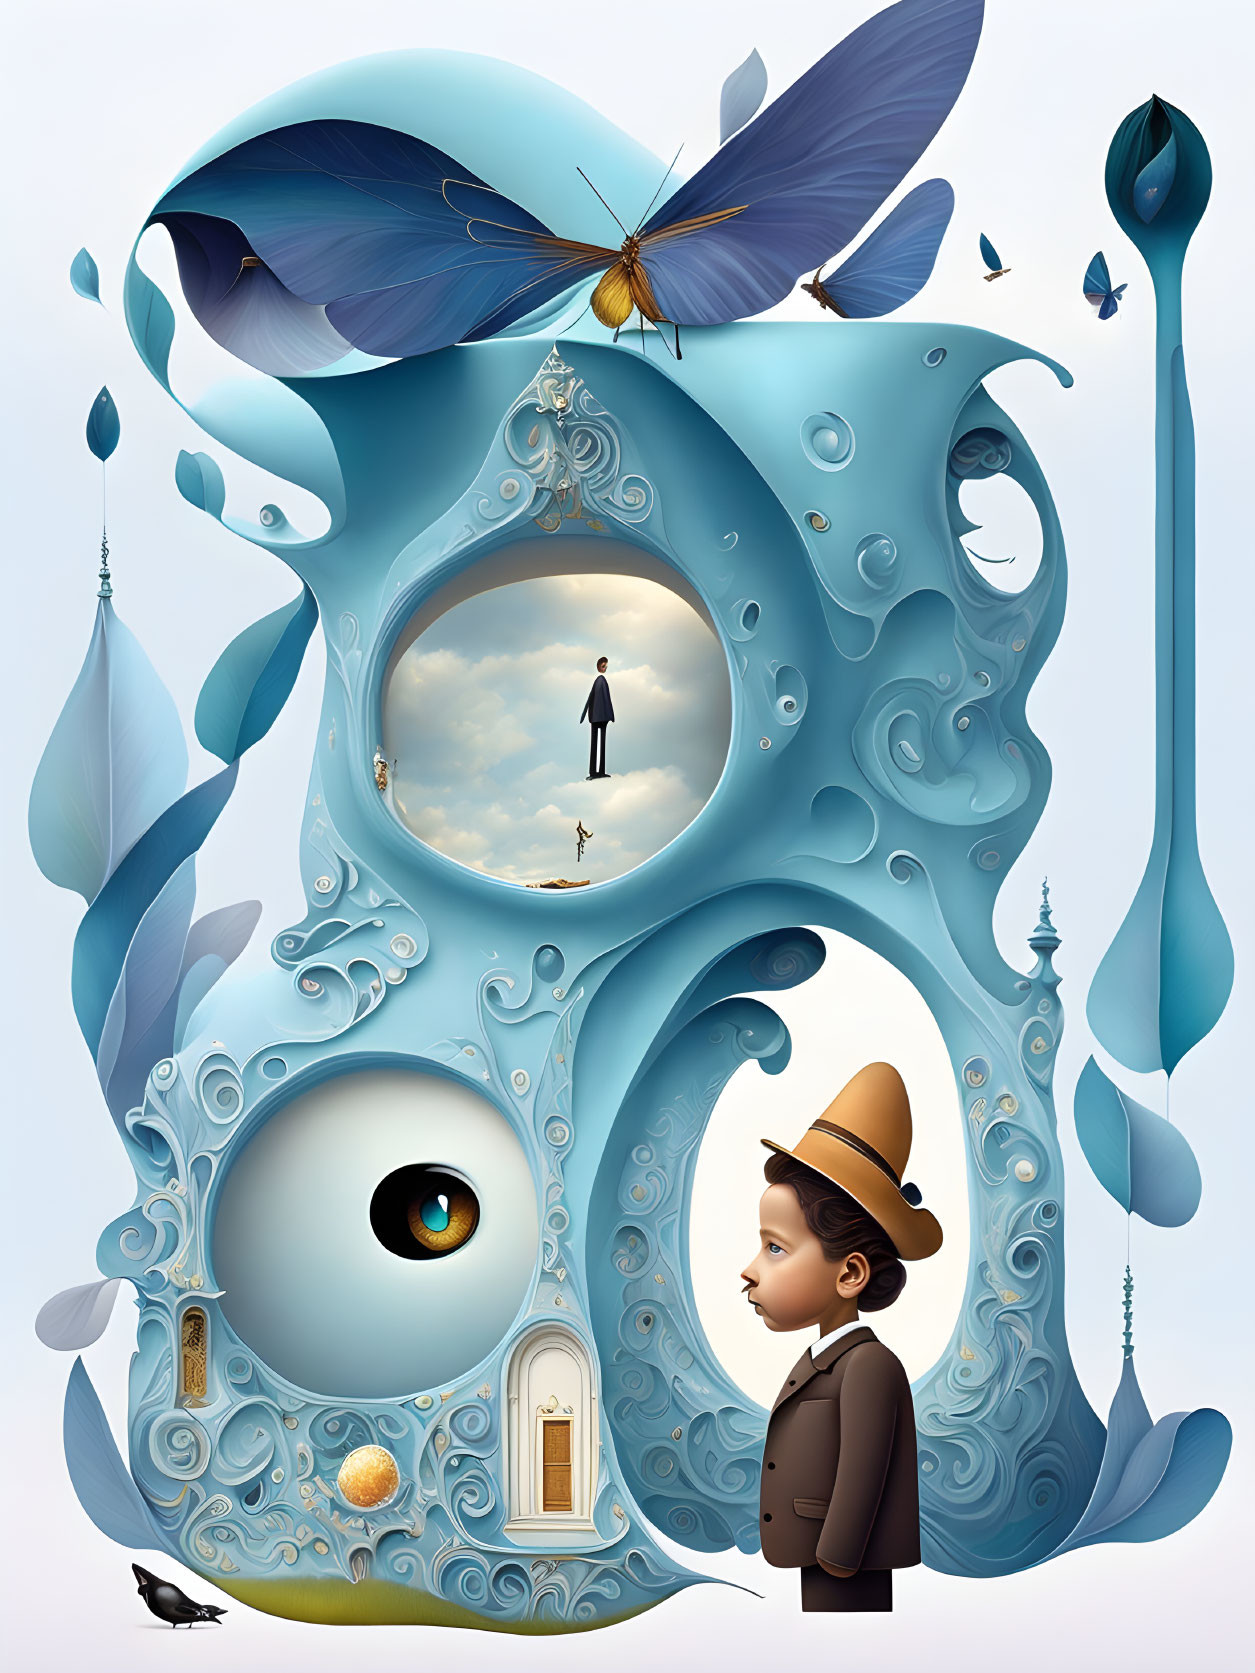 Surreal illustration featuring man in hat, whimsical swirls, butterfly, and circular frame.